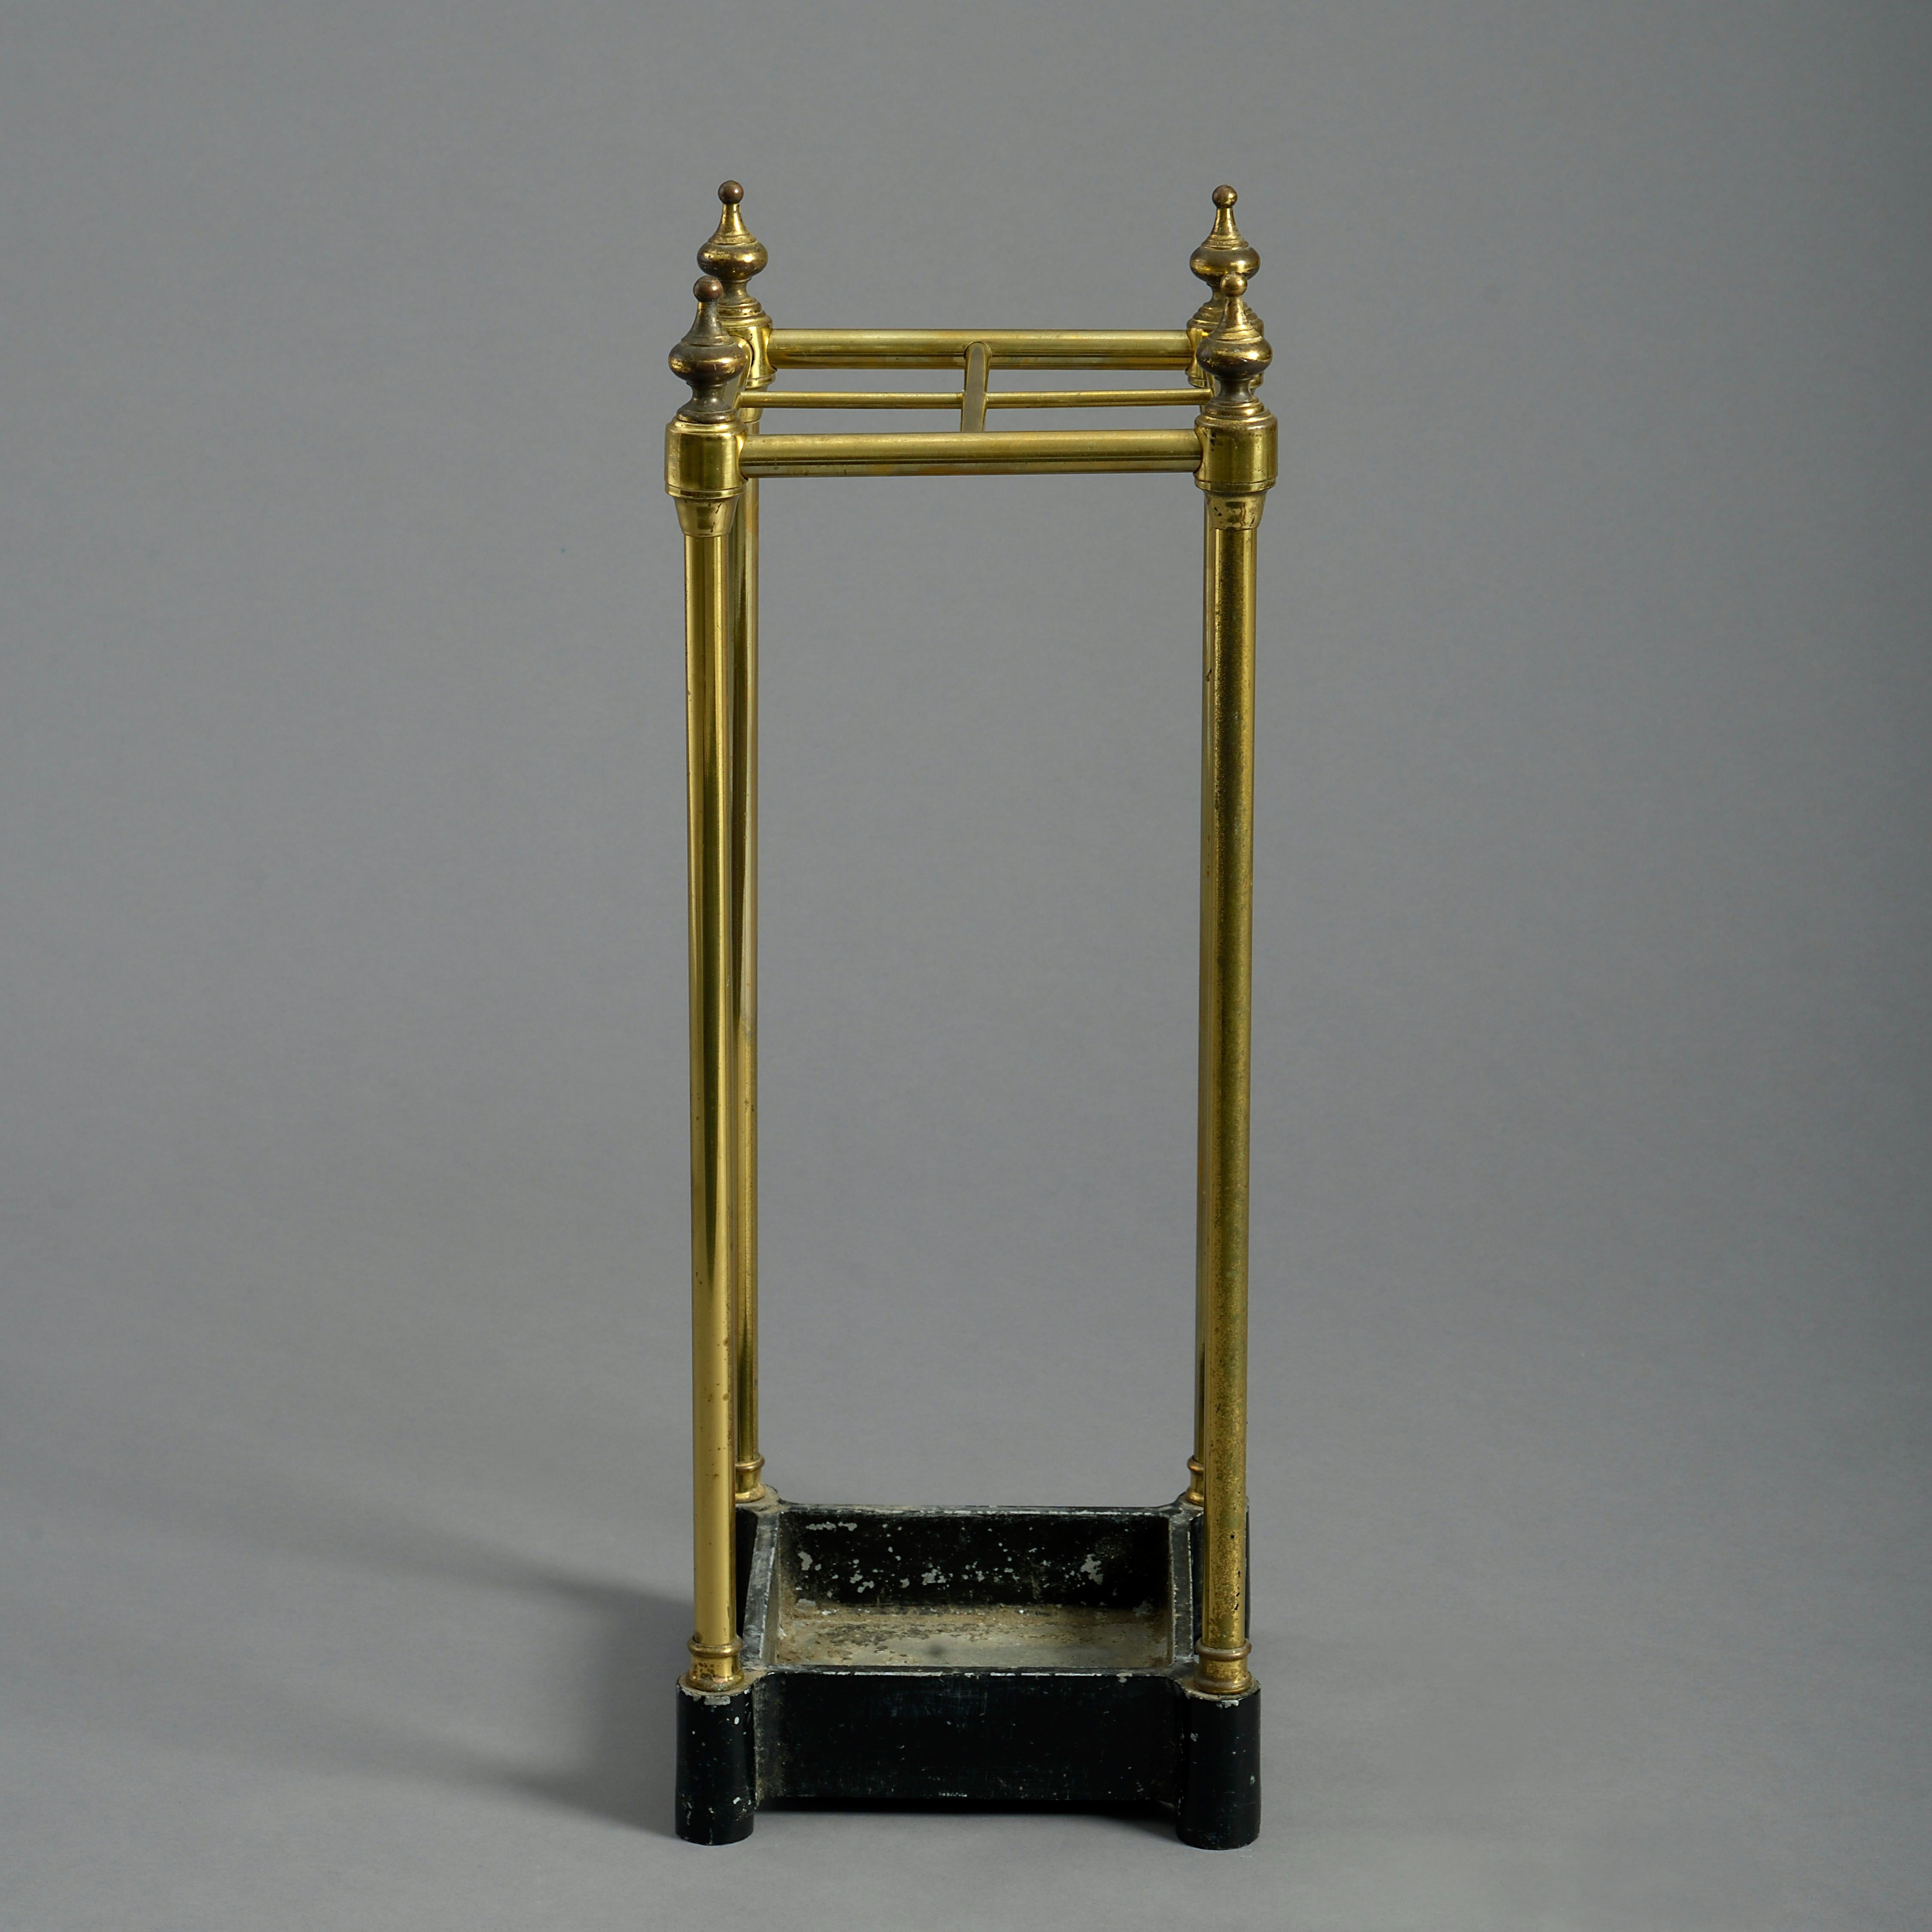 A mid-nineteenth century Victorian Period brass stick and umbrella stand with turned finials upon four dividers, supported upon a tubular frame and set on a black painted cast iron drip tray.